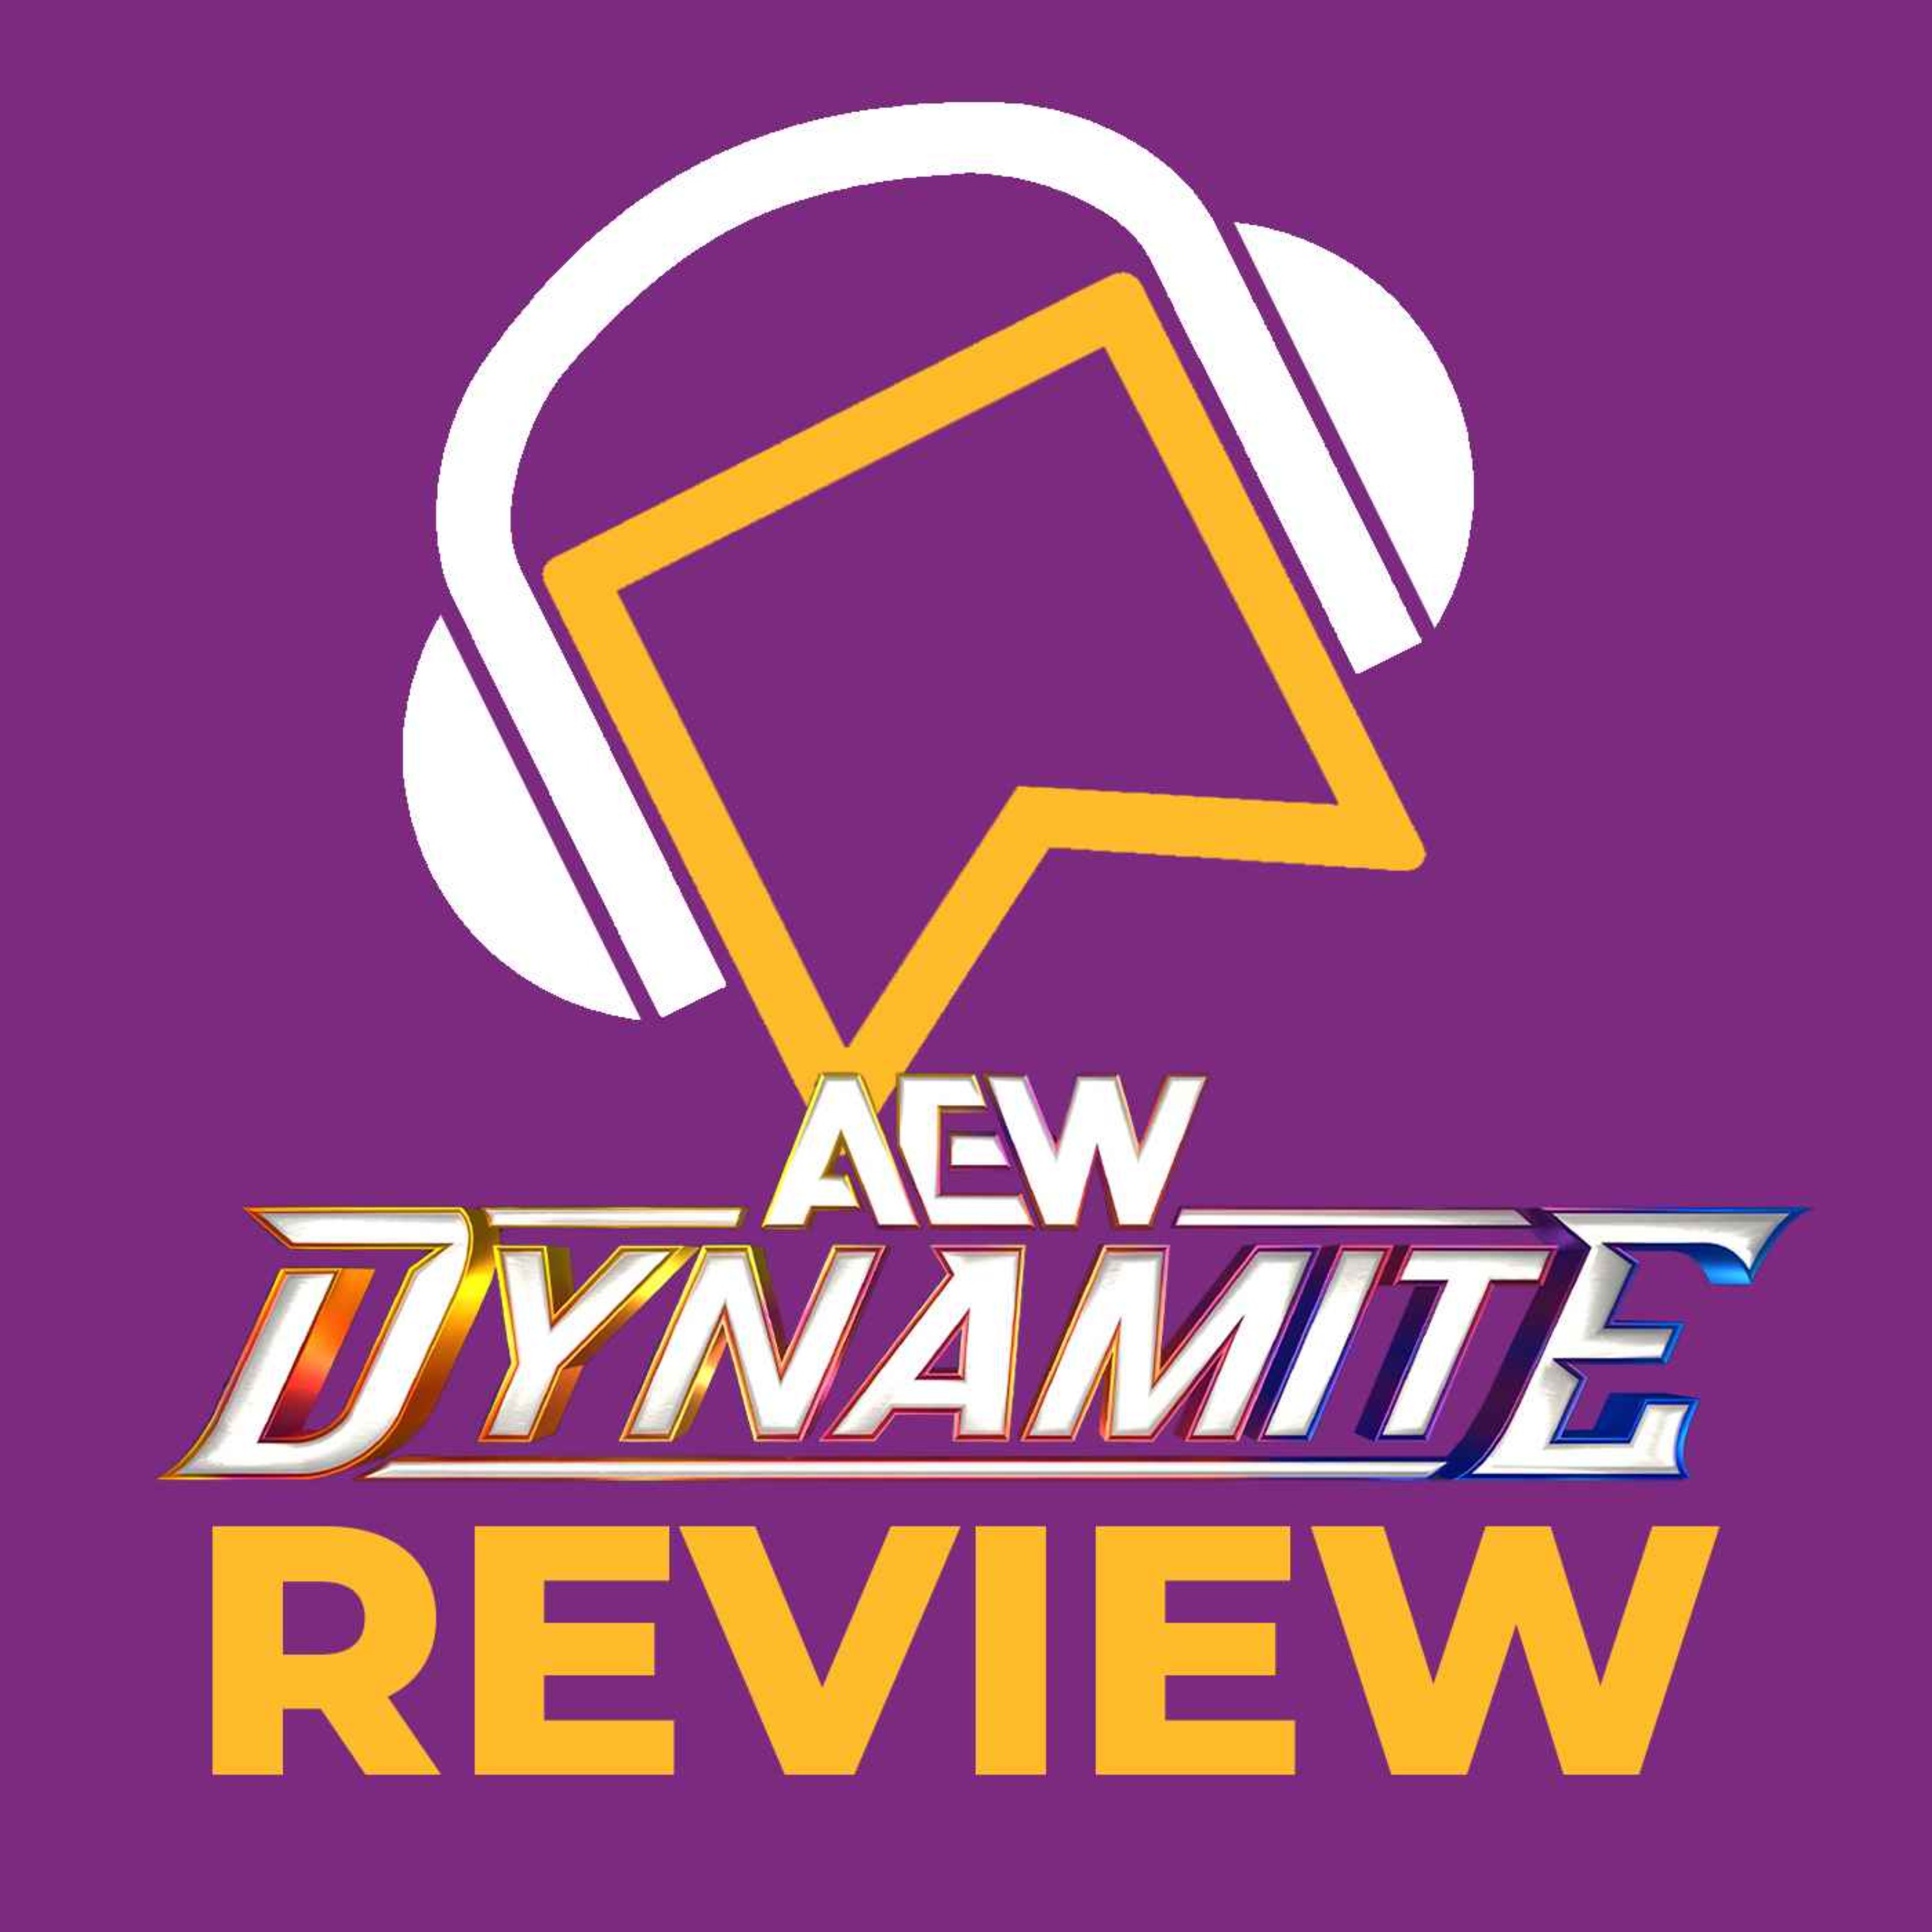 AEW Dynamite Review - Swerve Strickland Is The #1 Contender! The Young Bucks Vs. Private Party! Willow Nightingale Is Heading To AEW Dynasty! Is Shibata All The Way BACK?!